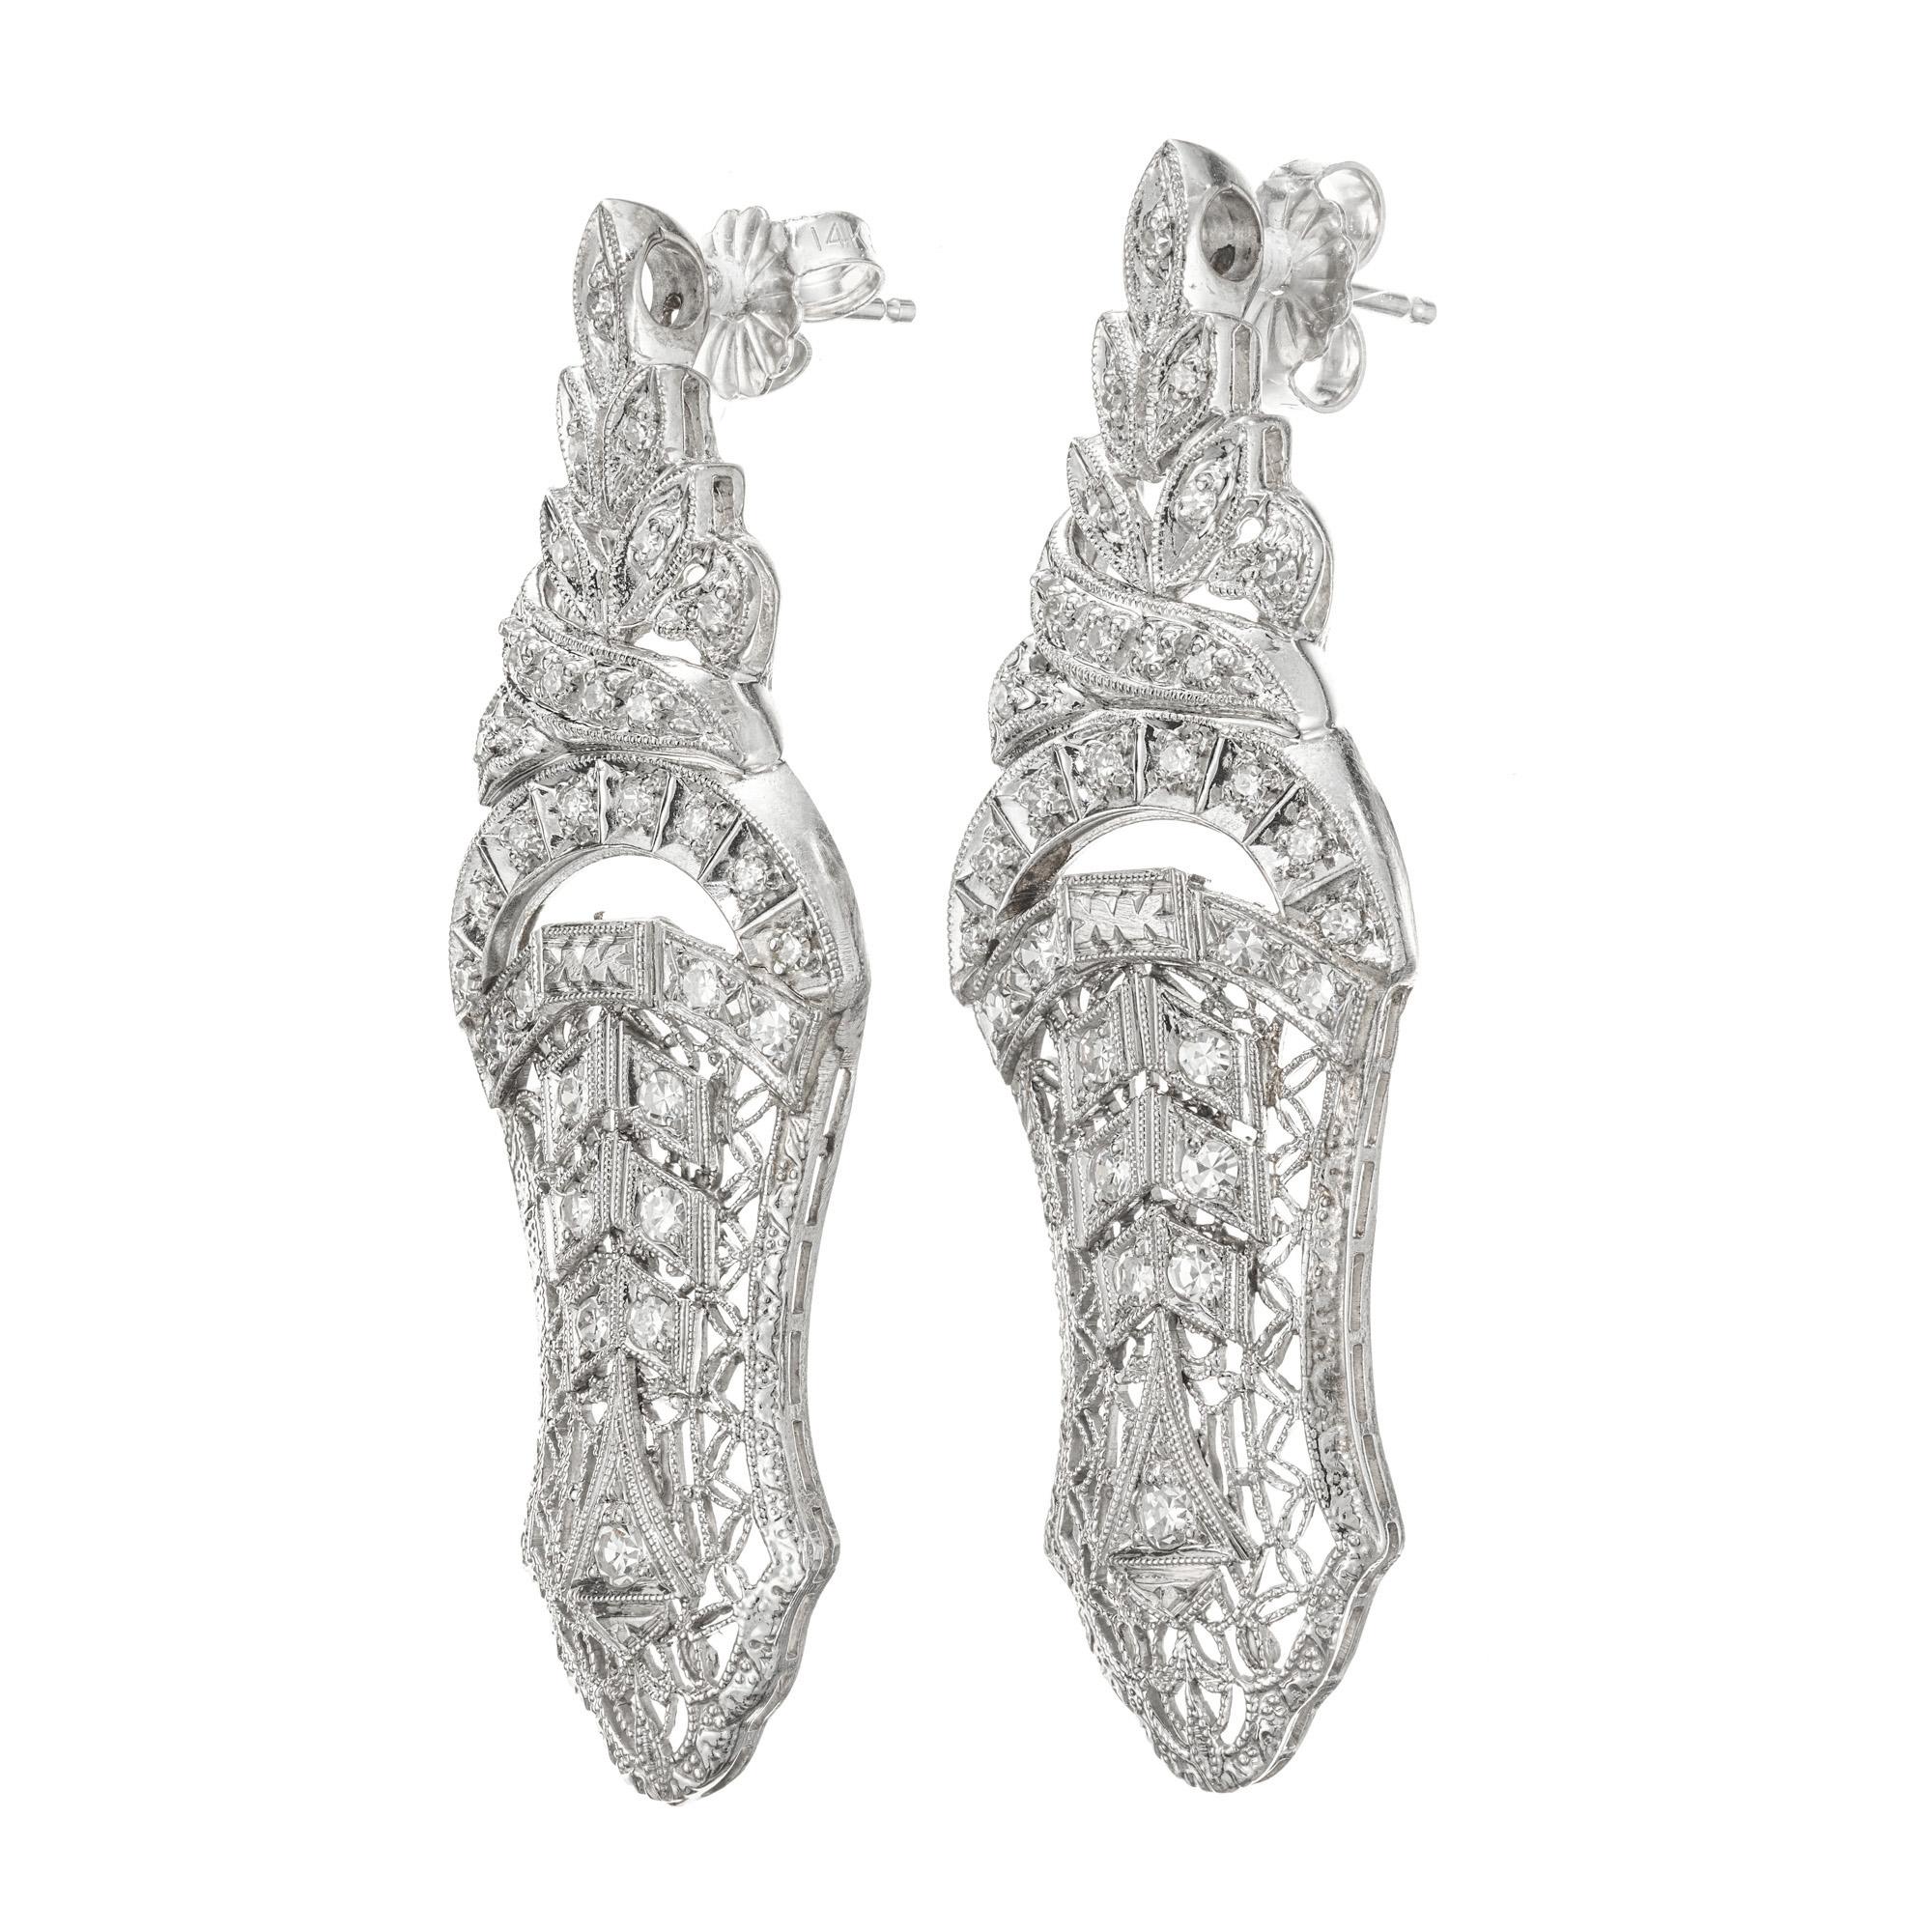 1940's Open work detailed drop diamond earrings. 52 round cut diamonds set in a 14k white gold filigree settings. 

52 round diamonds, approx. total weight .25cts, H, SI
14k White Gold
Tested and stamped: 14k
14k white gold
7.1 grams
Top to bottom: